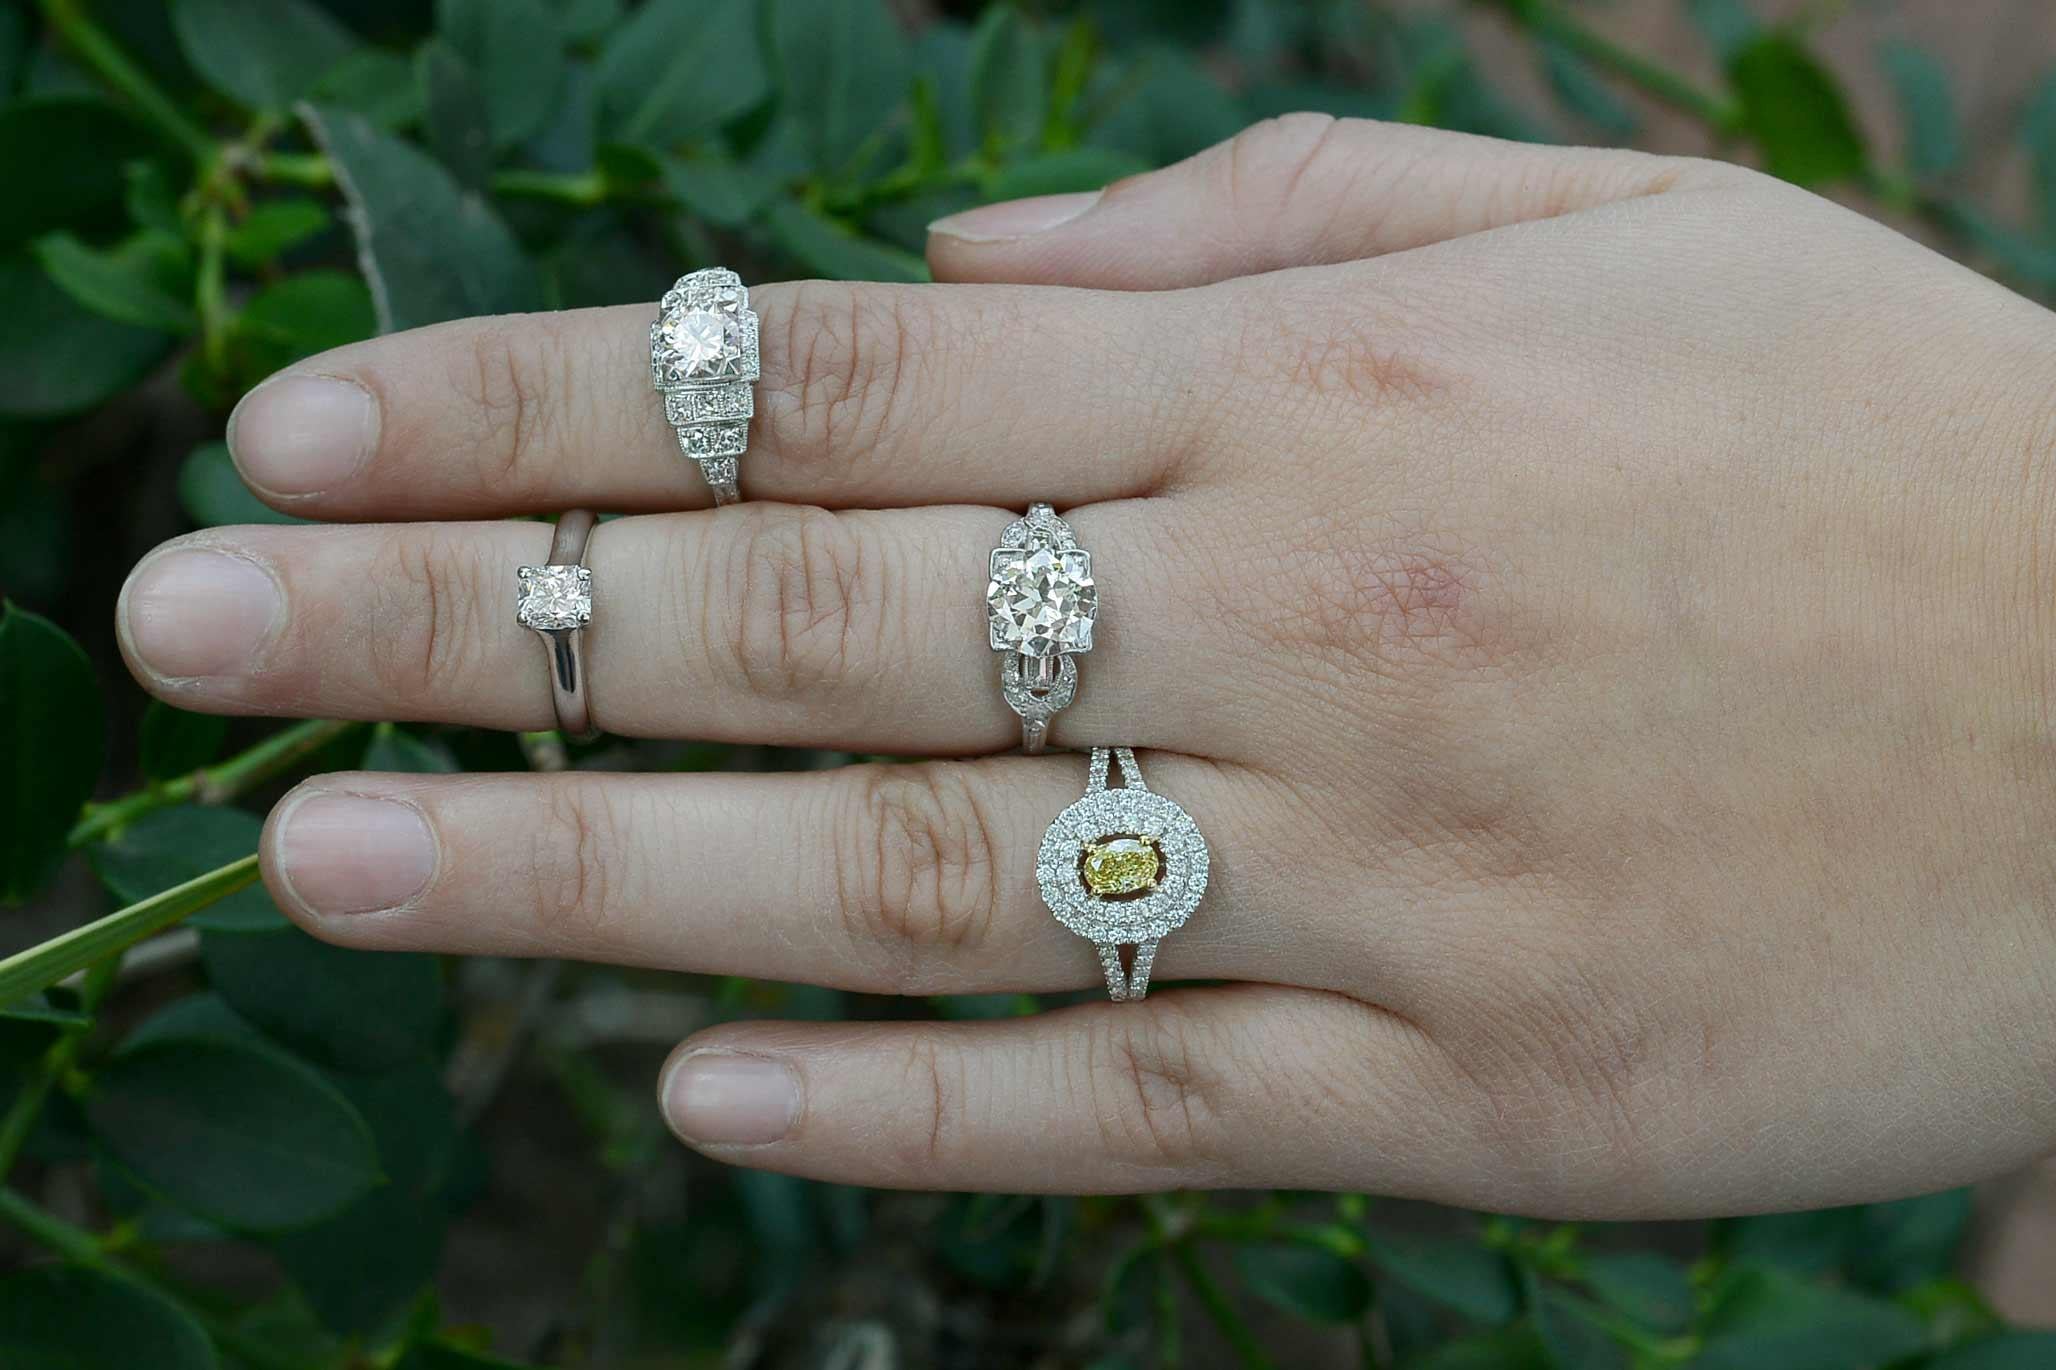 A delightful halo of brilliant white pave' set diamonds encircles an amazing oval diamond of fancy intense yellow. A size 7 1/4 engagement ring with a great amount of knuckle-coverage, would make for a stunning cocktail or statement ring. At 1.21